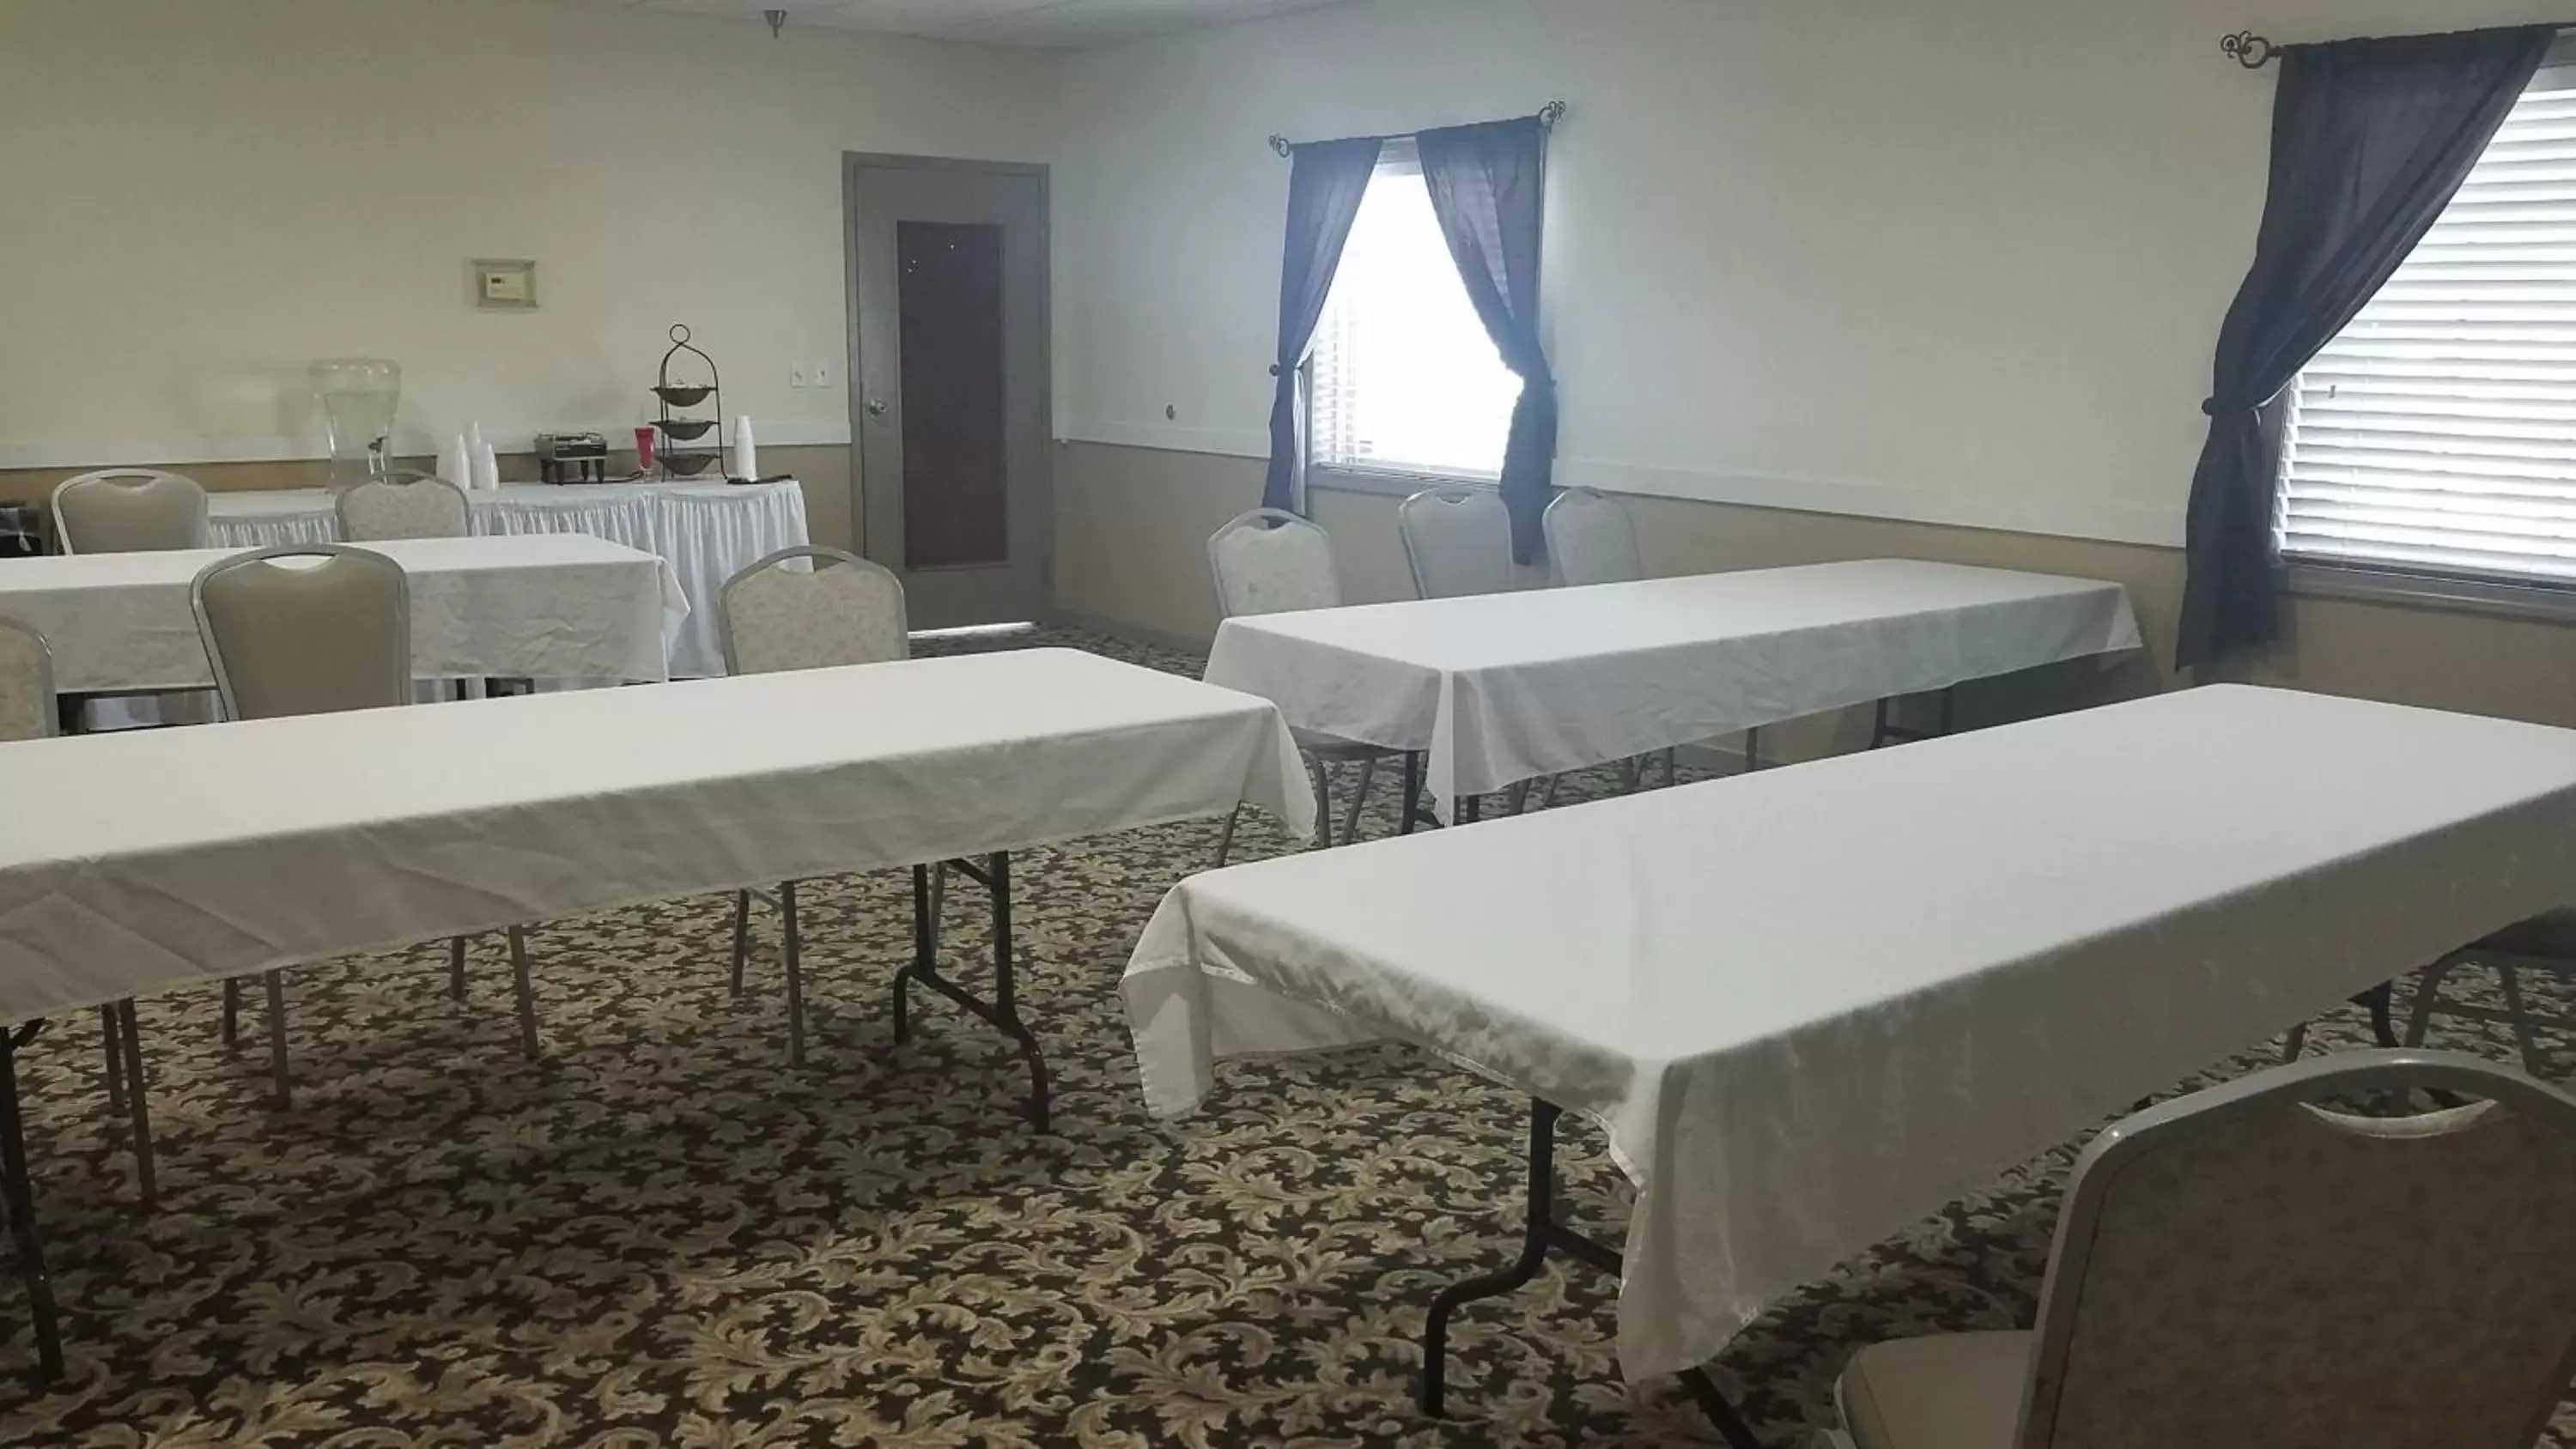 Banquet/Function facilities, Banquet Facilities in Comfort Inn & Suites at I-74 and 155